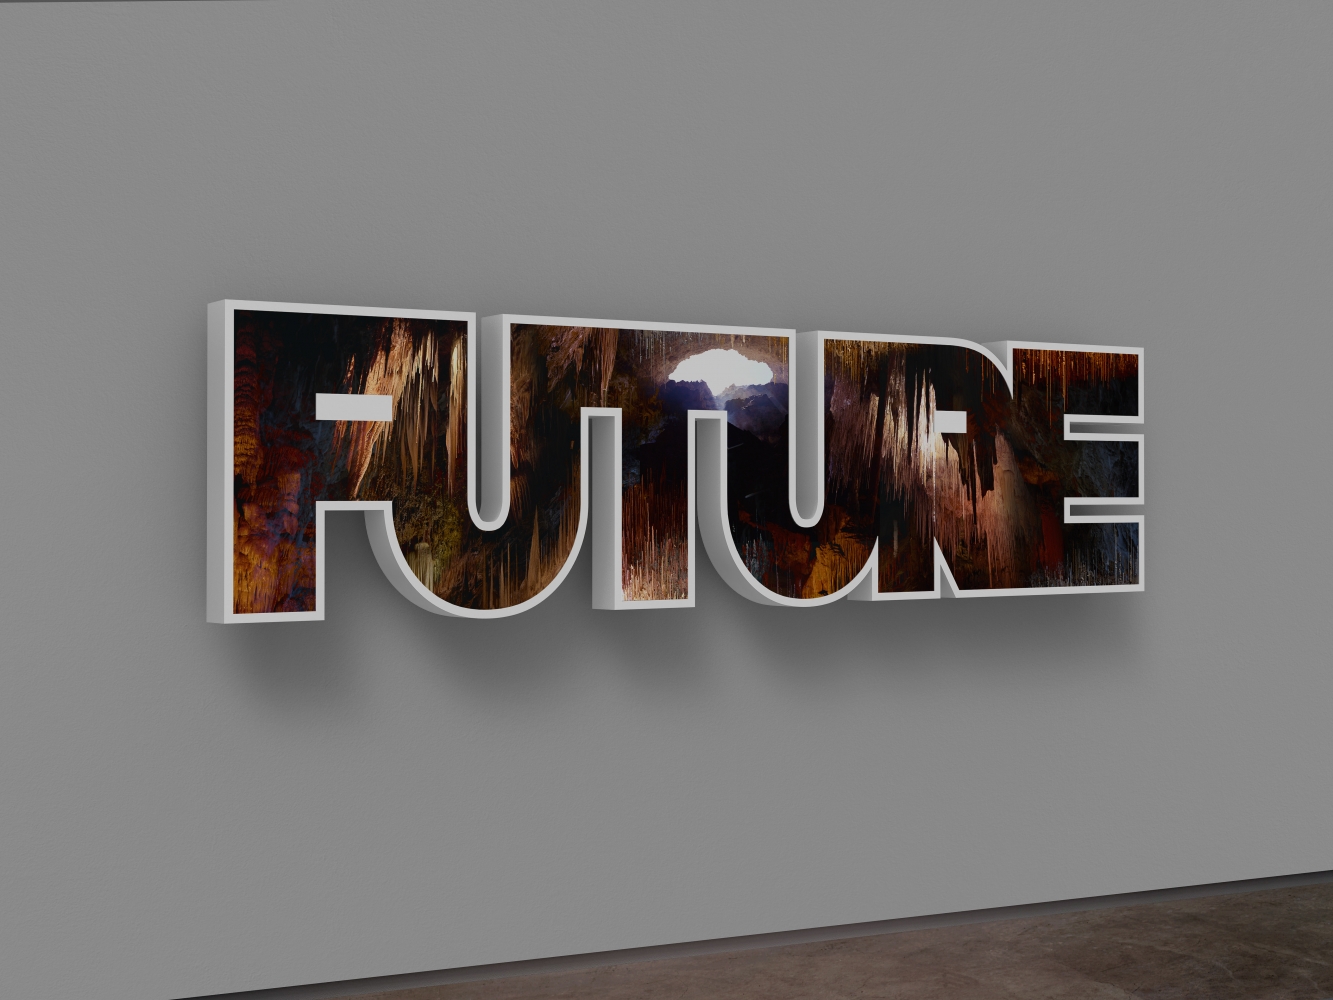 Doug Aitken

FUTURE (open doors)

2020

Chromogenic transparency on acrylic in aluminum lightbox with LEDs

34 3/8 x 136 x 7 inches (87.3 x 345.4 x 17.8 cm)

Edition&amp;nbsp;of 4, with 2AP

DA 680

&amp;nbsp;

INQUIRE